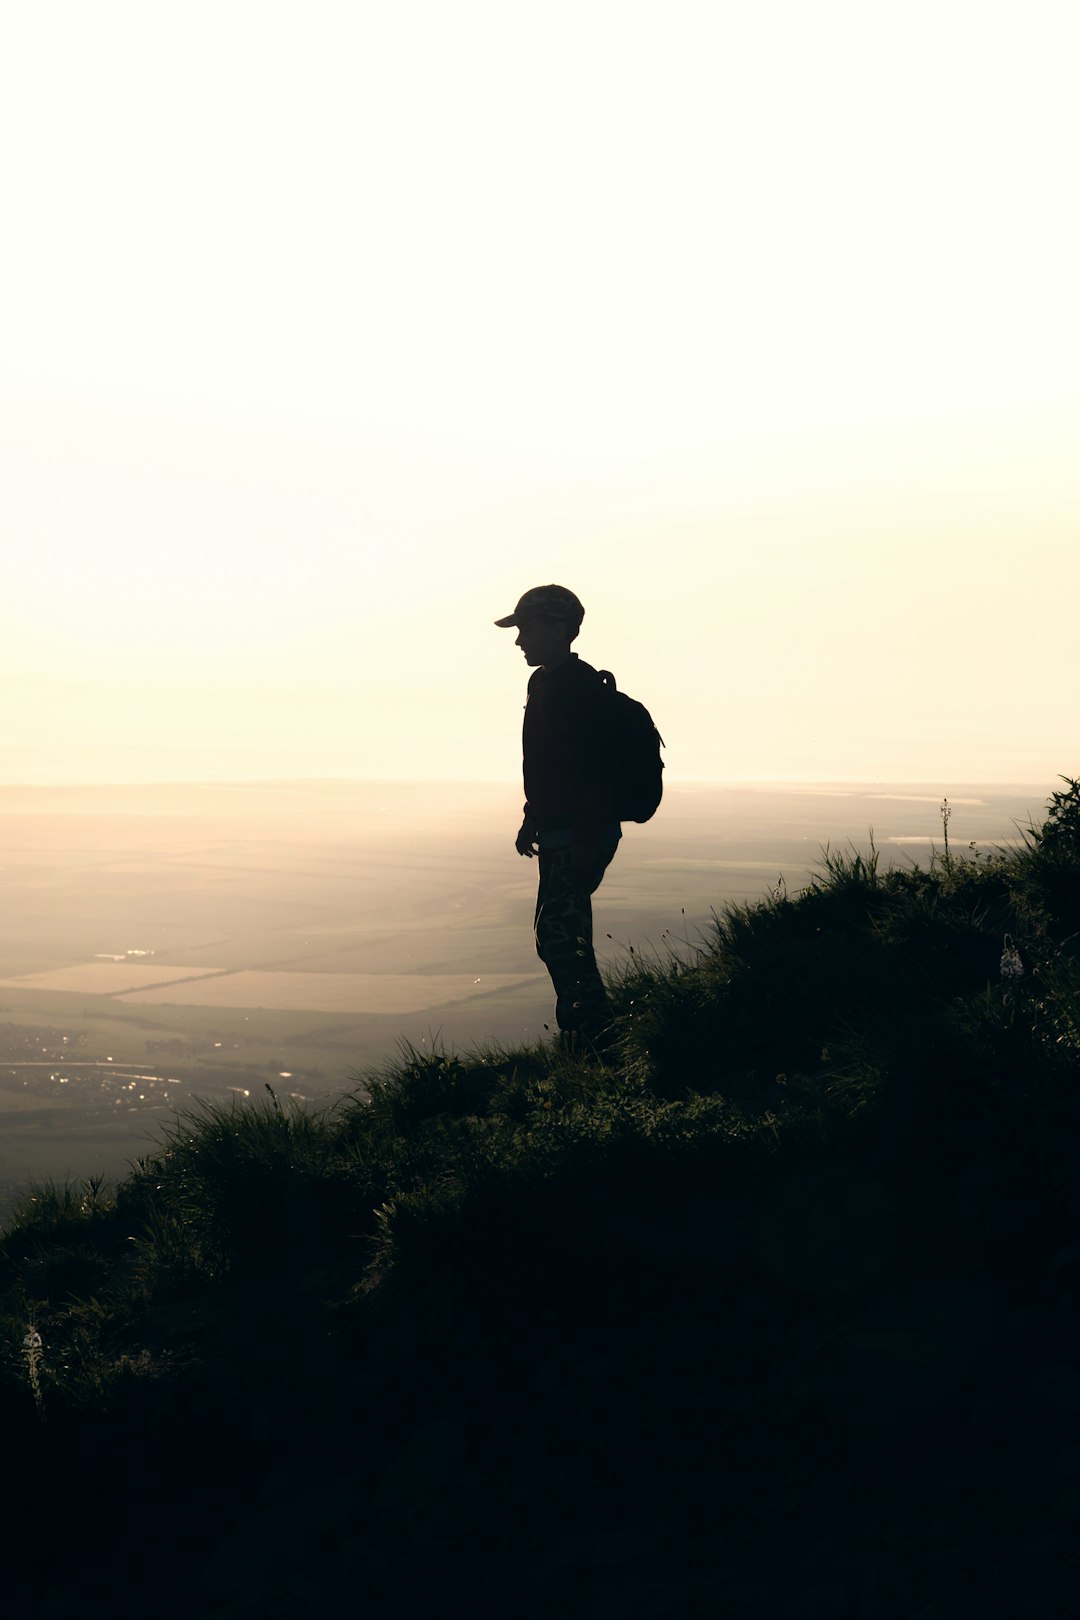 silhouette of man with backpack standing on slope of hill at dusk